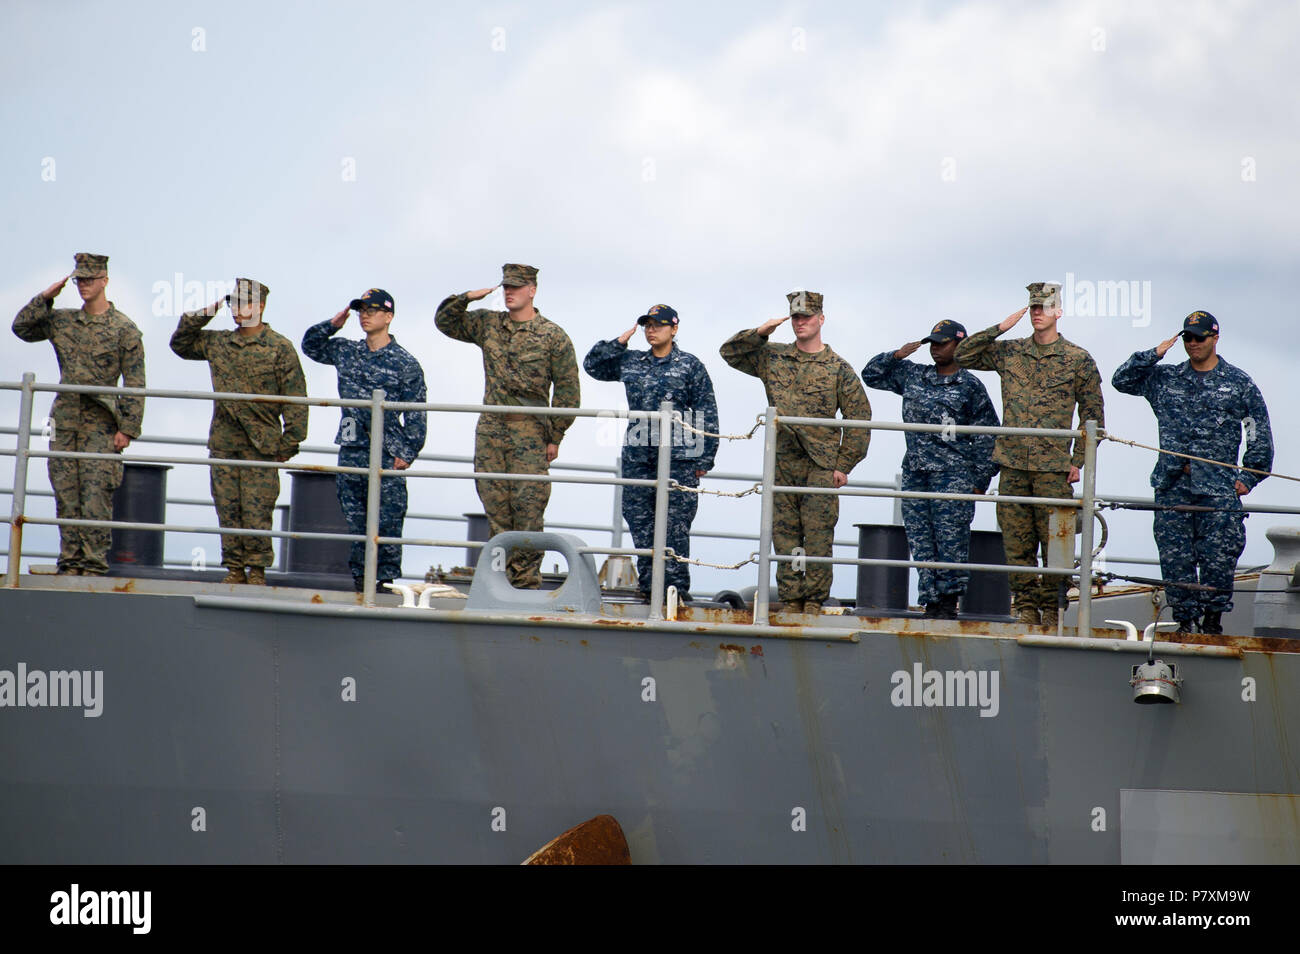 American Harpers Ferry-class dock landing ship USS Oak Hill (LSD-51) during Naval Parade to celebrate 100th annversary of Polish Navy in Gdynia, Polan Stock Photo